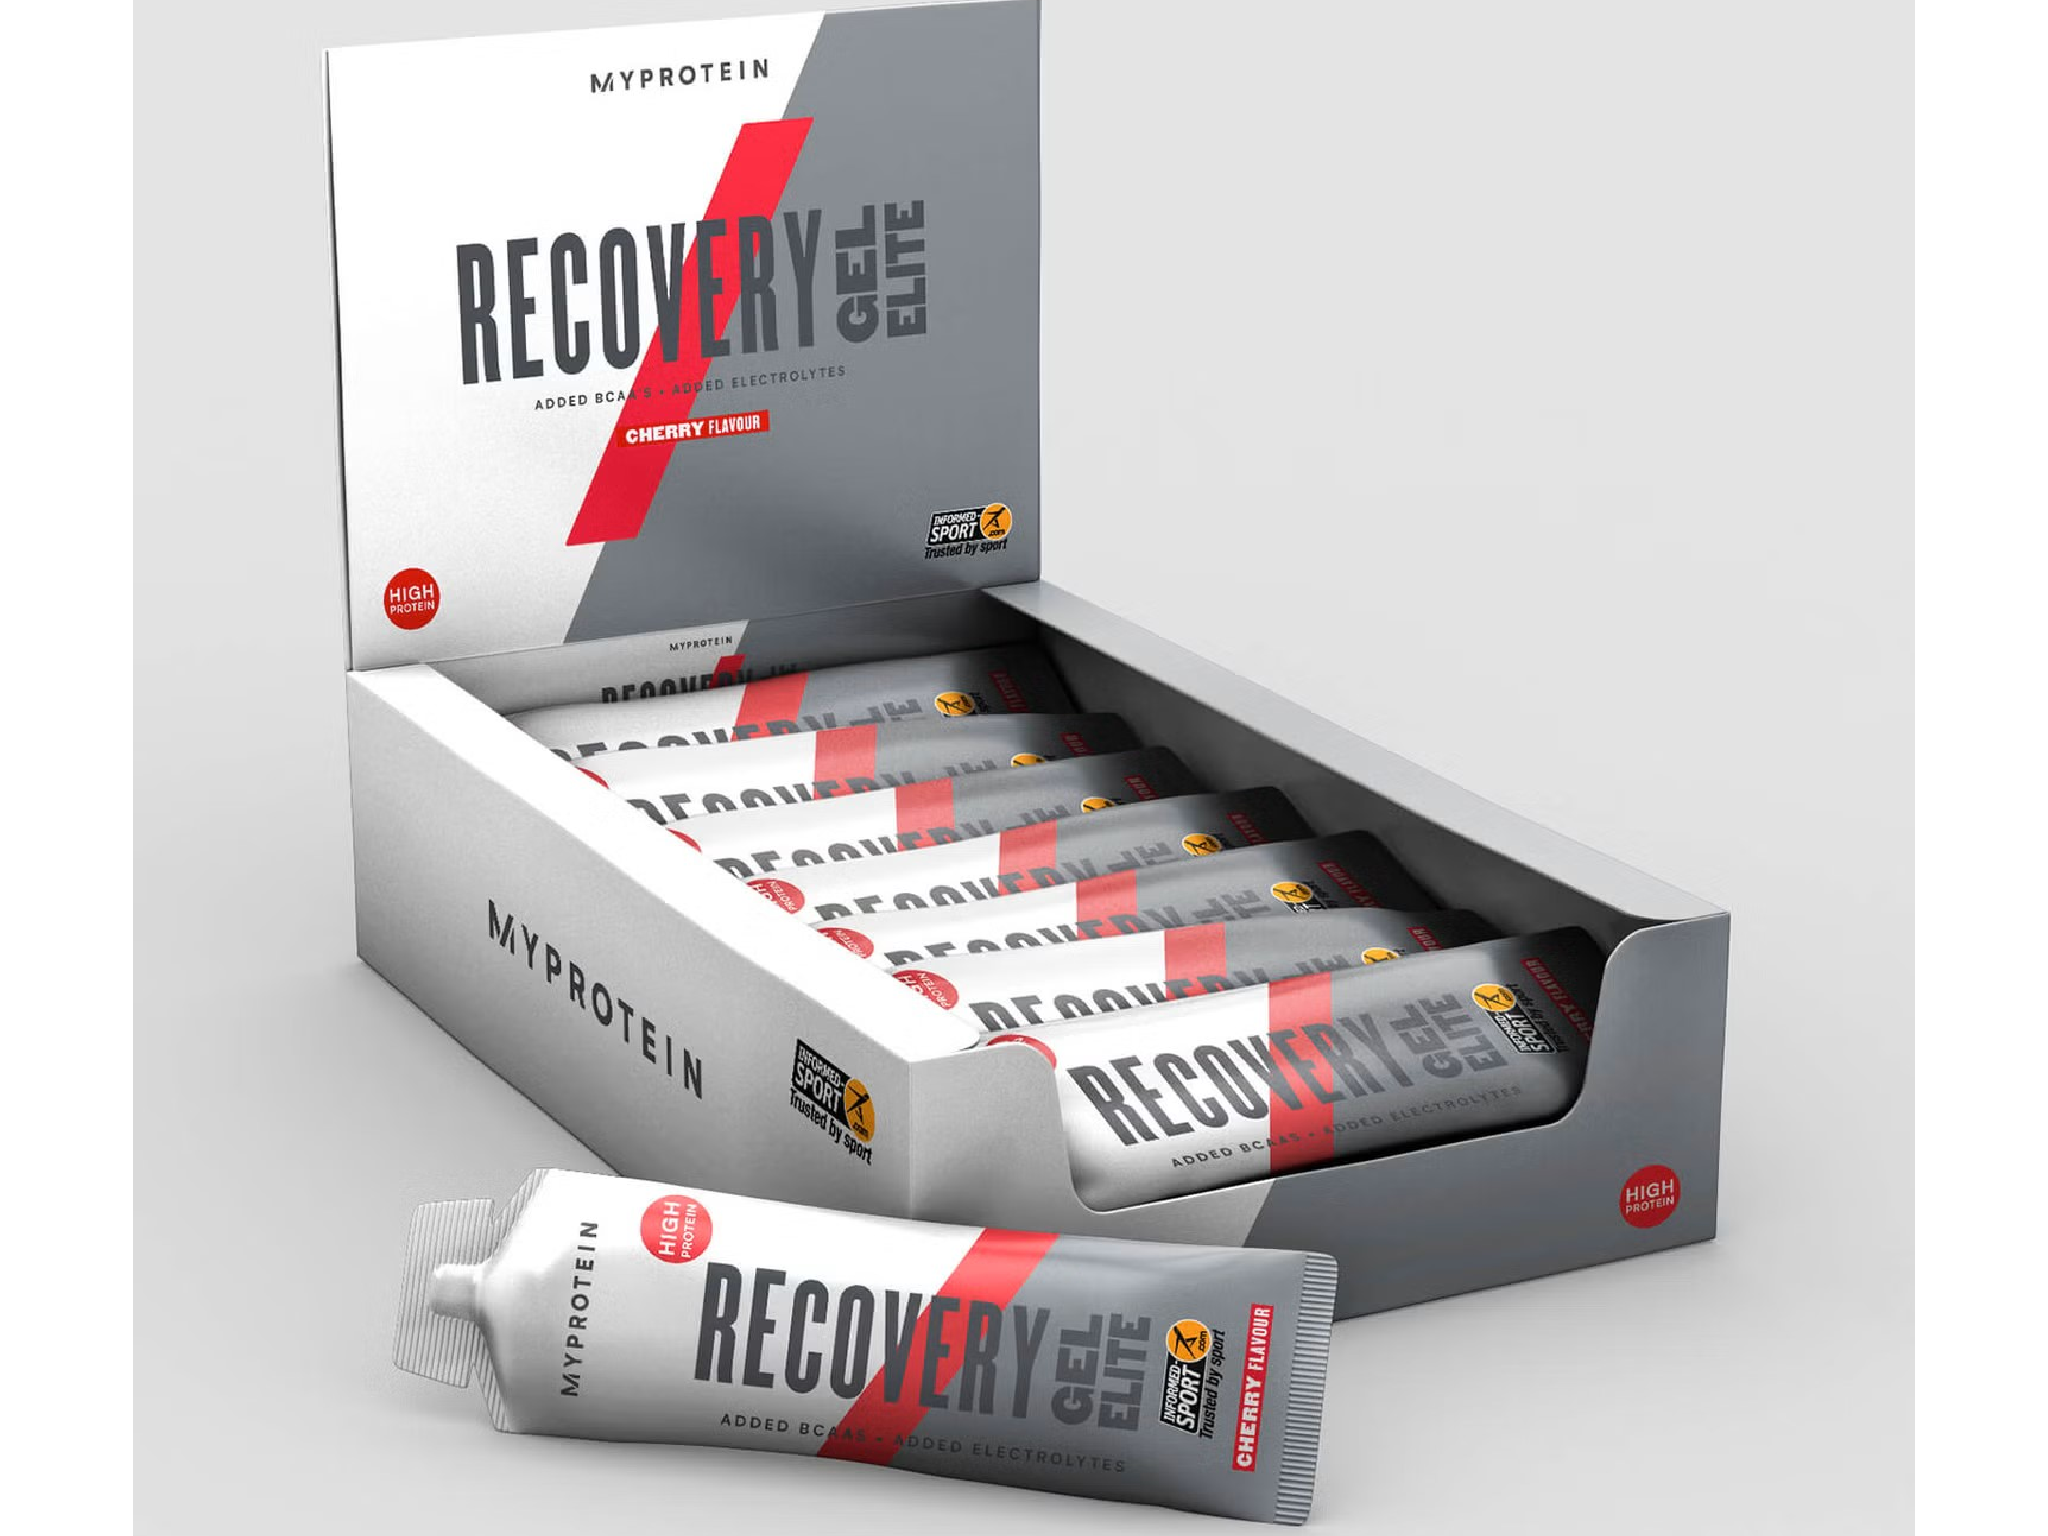 protein, endurance training, indybest, thg fitness, this recovery gel promises to quickly repair your body post-workout